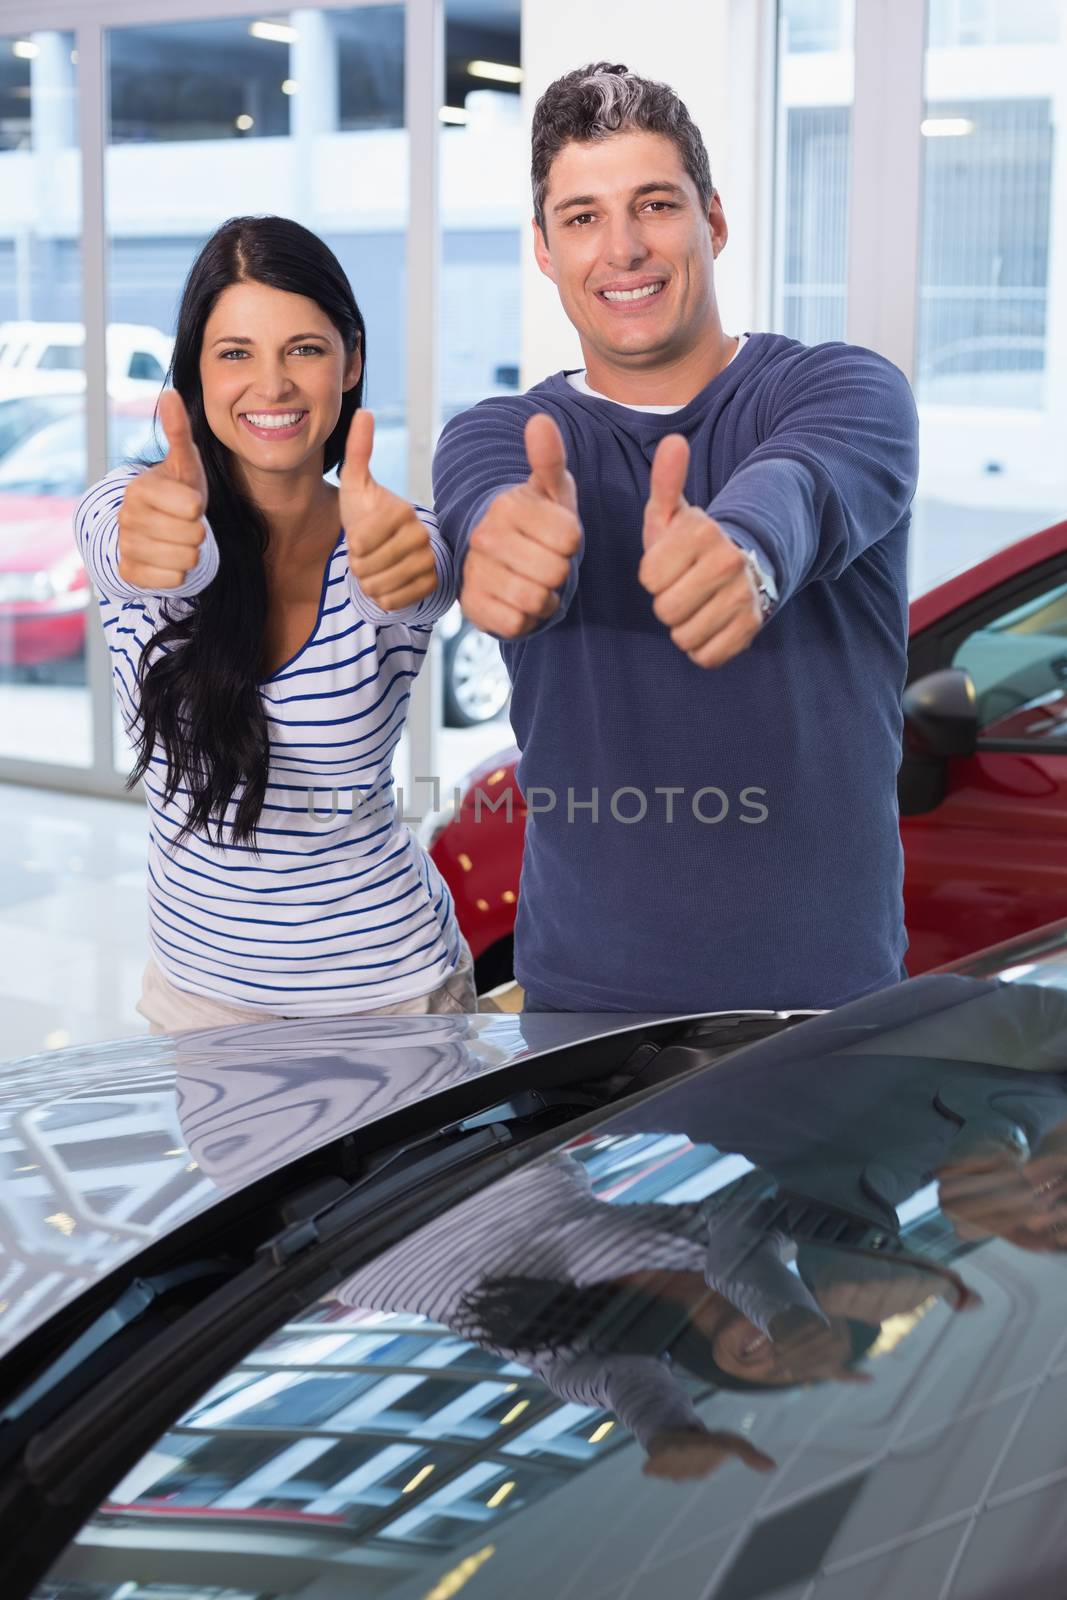 Smiling couple giving thumbs up at new car showroom